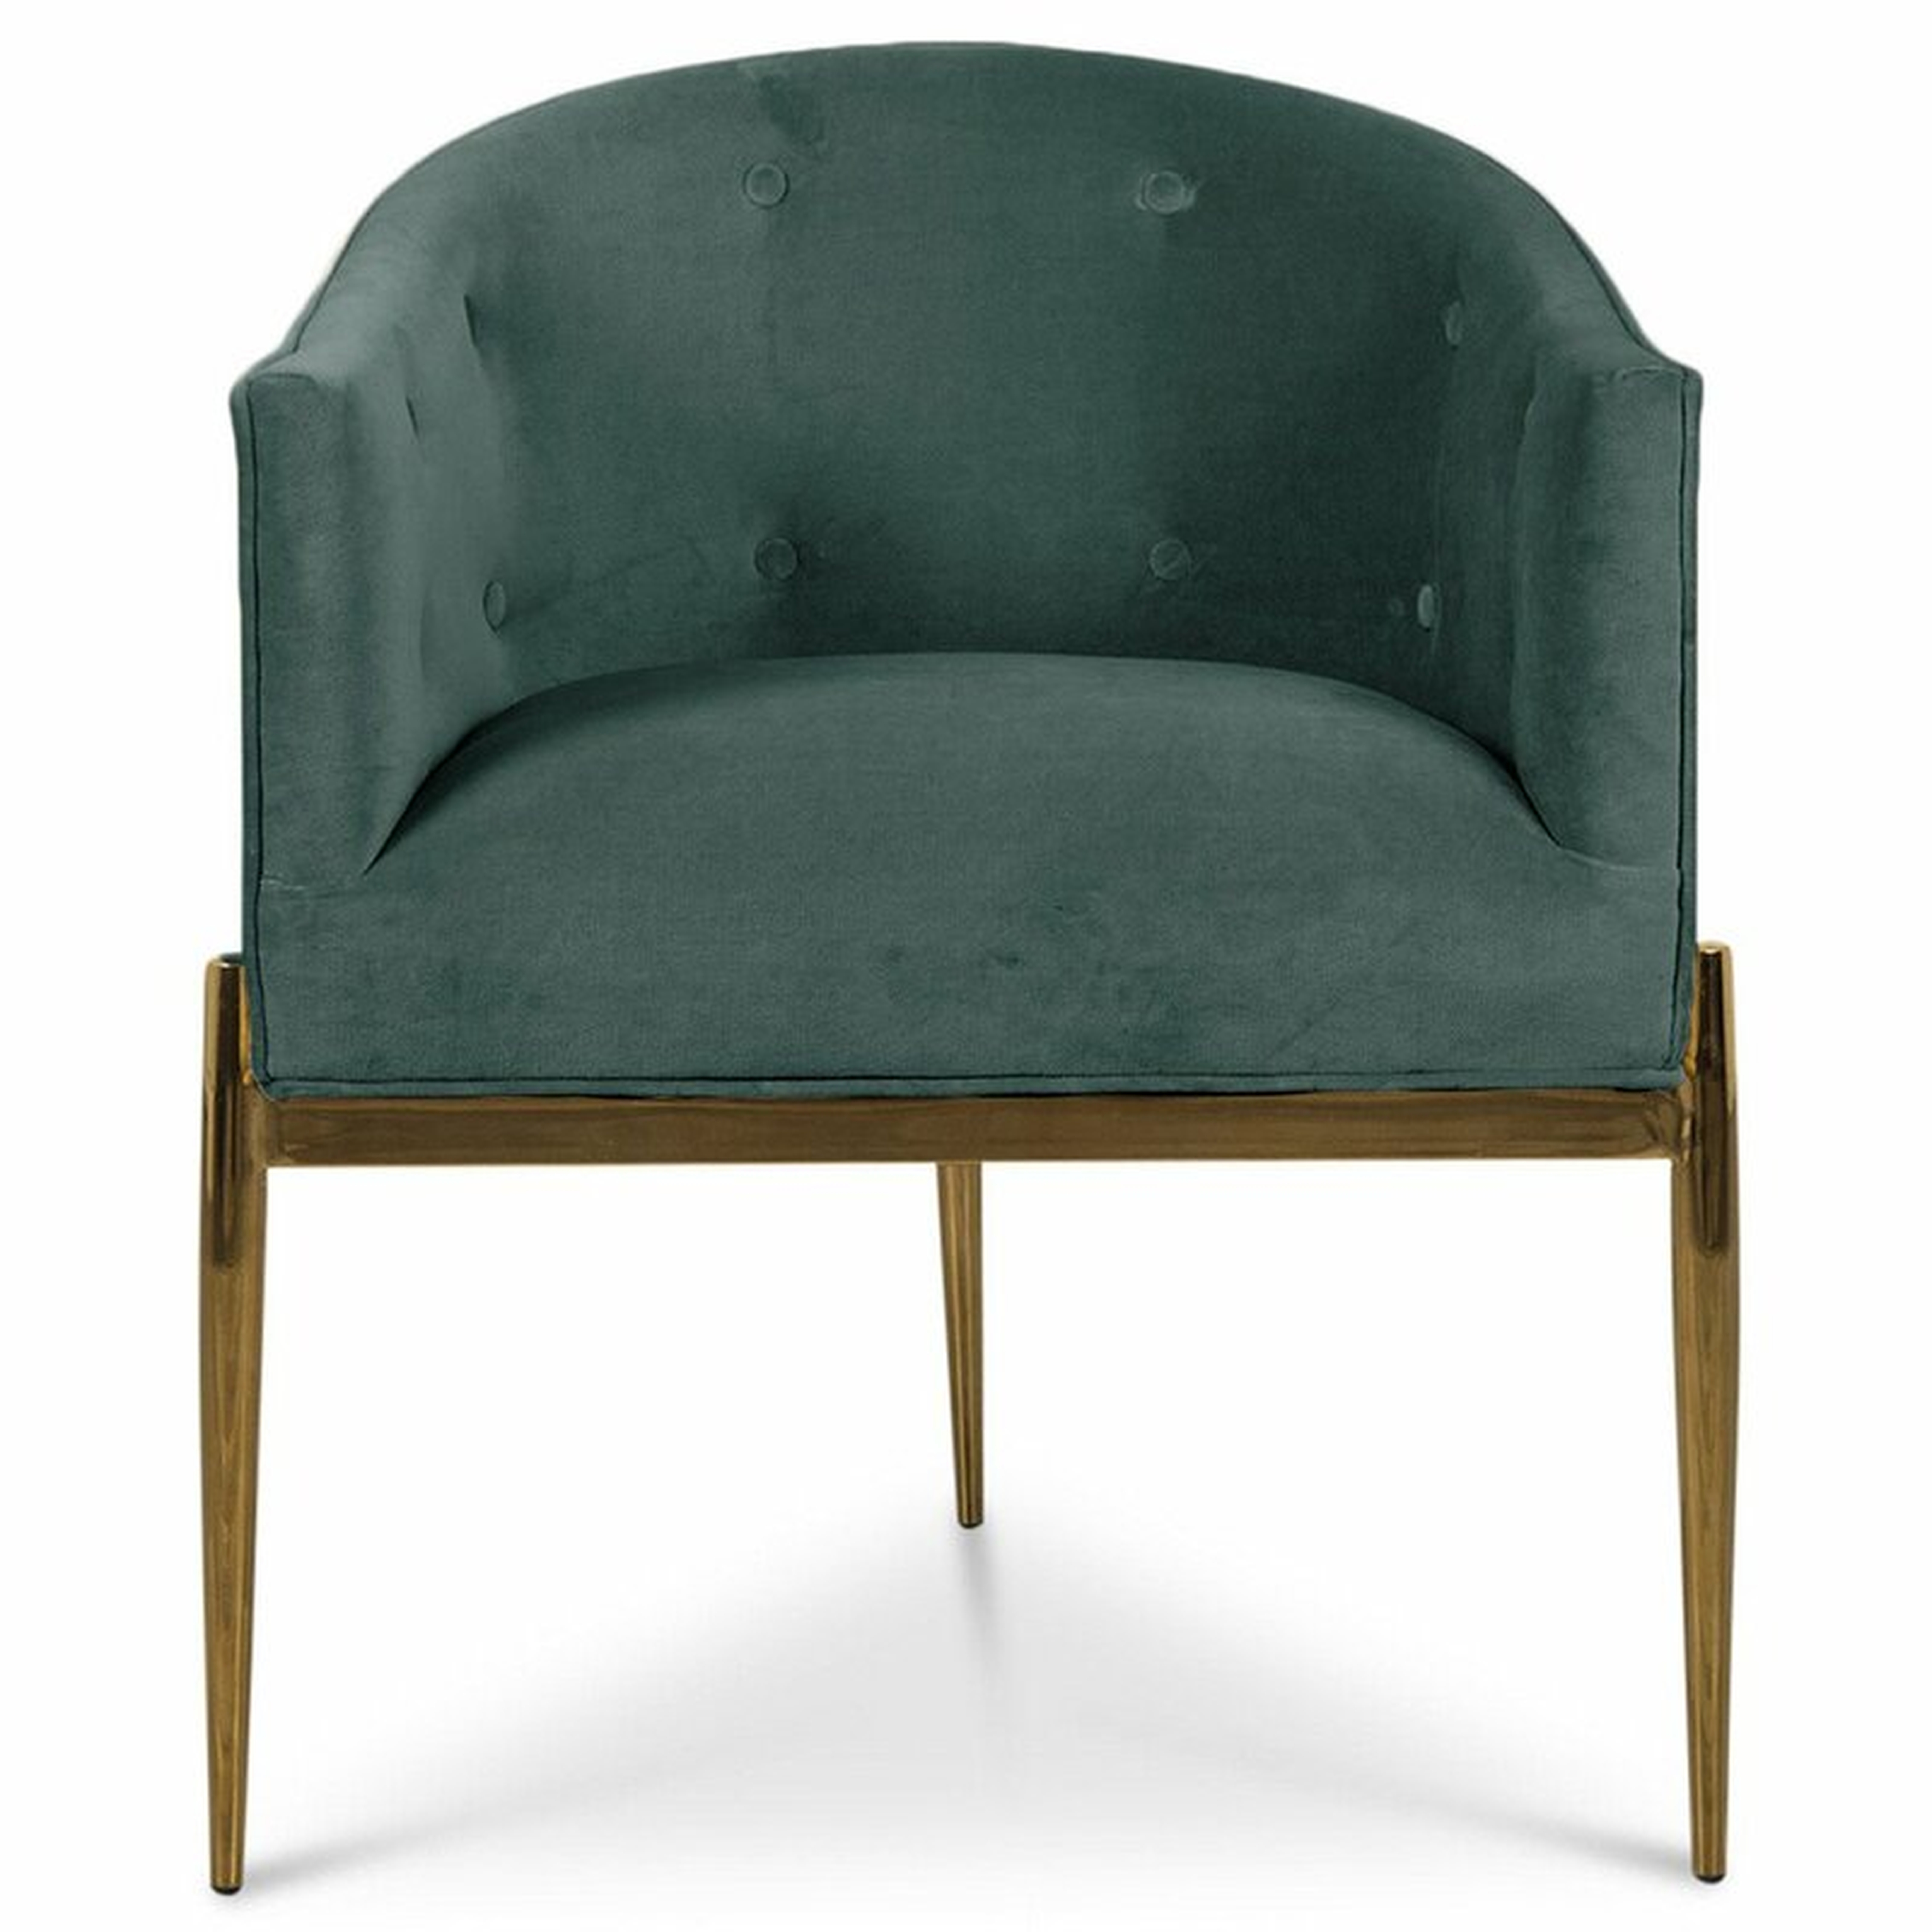 Art Deco Upholstered Dining Chair Upholstery Color: Hunter Green - Perigold